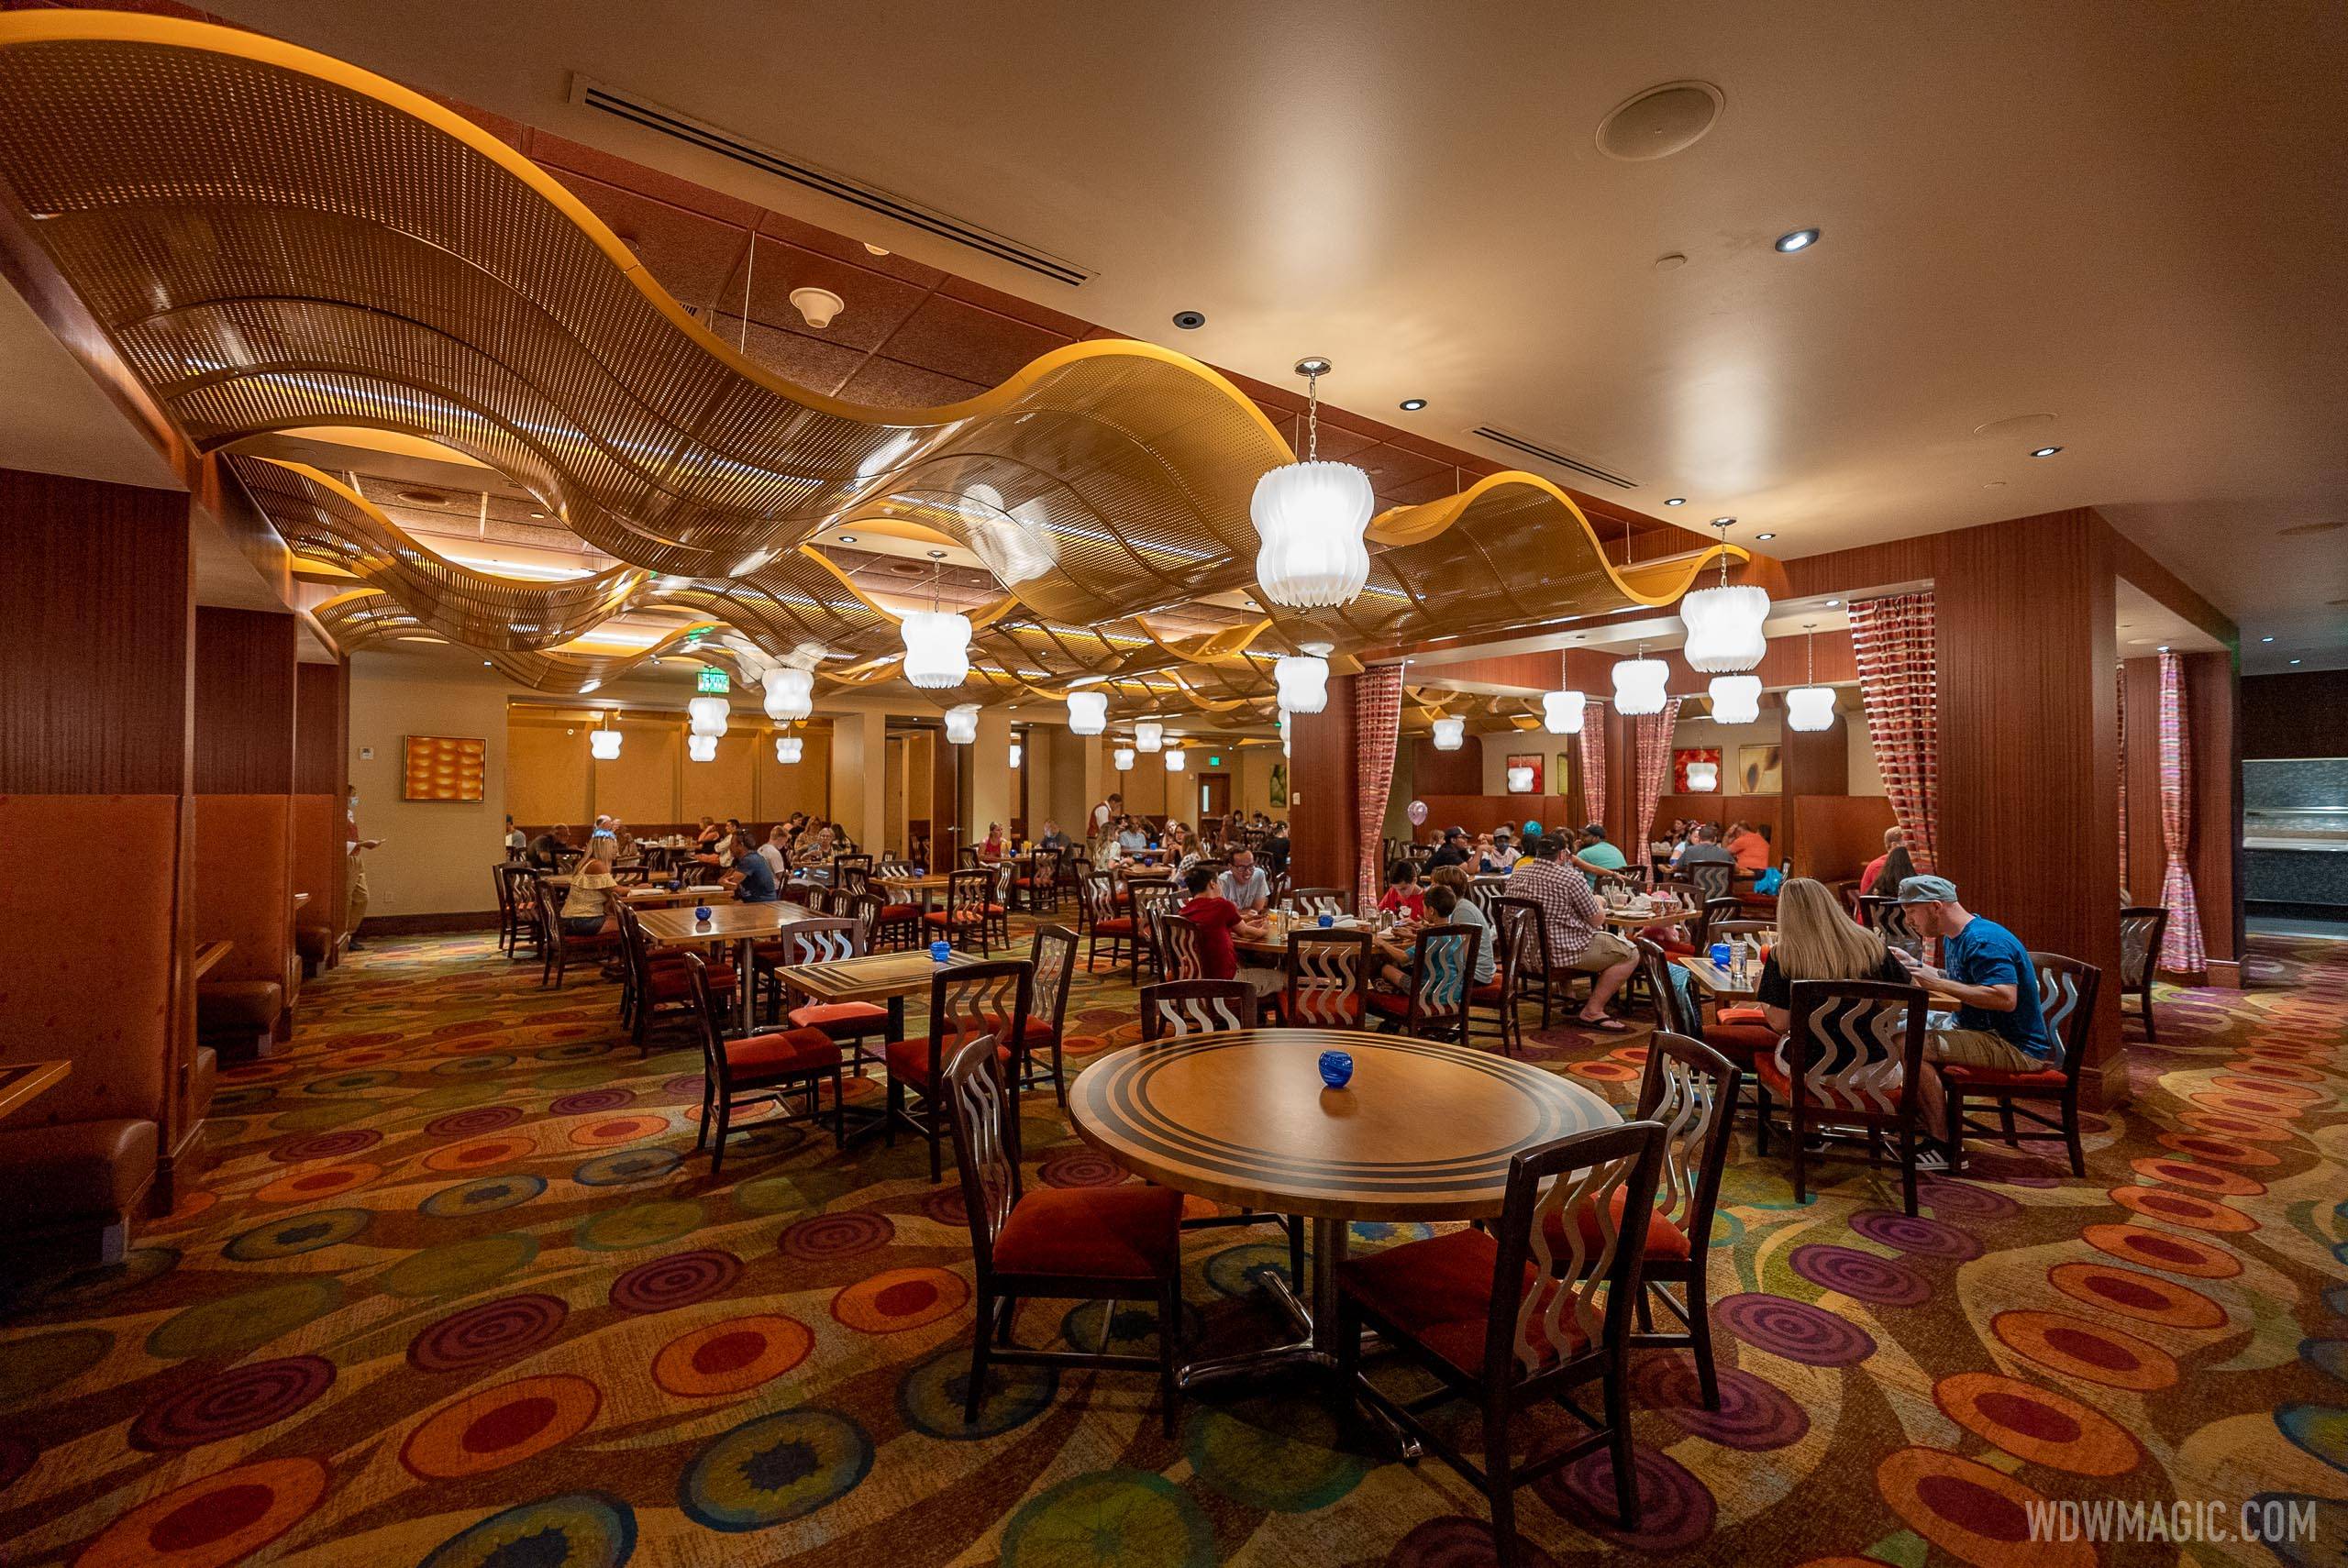 Press Release - Details on the new Wave restaurant at the Contemporary Resort